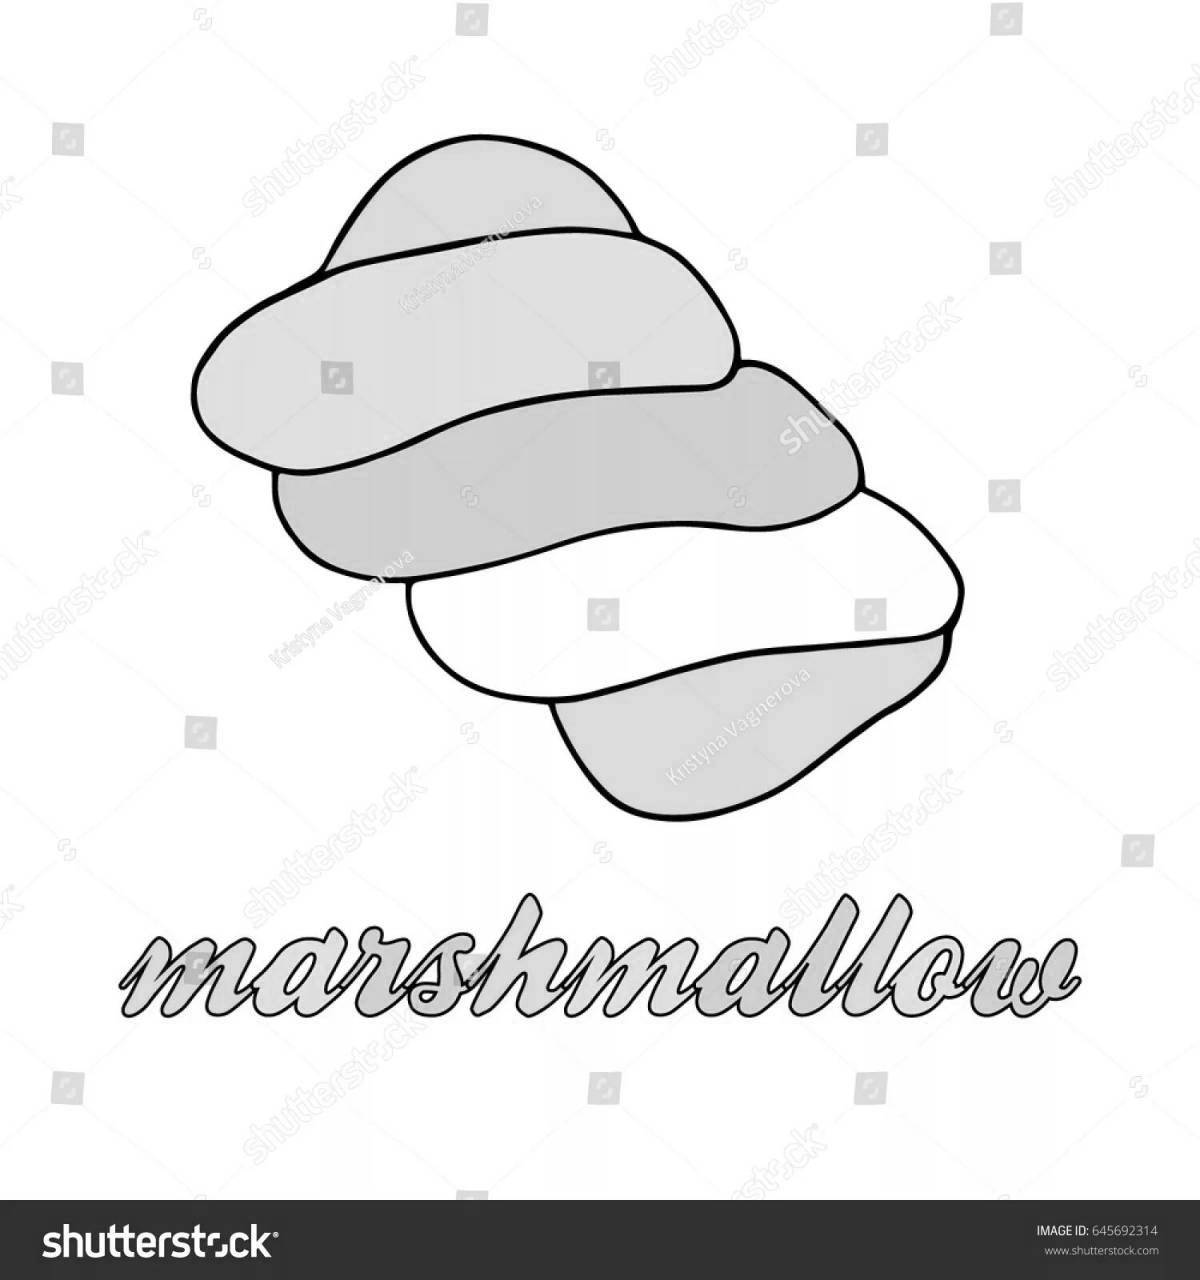 Irresistible marshmallow coloring page